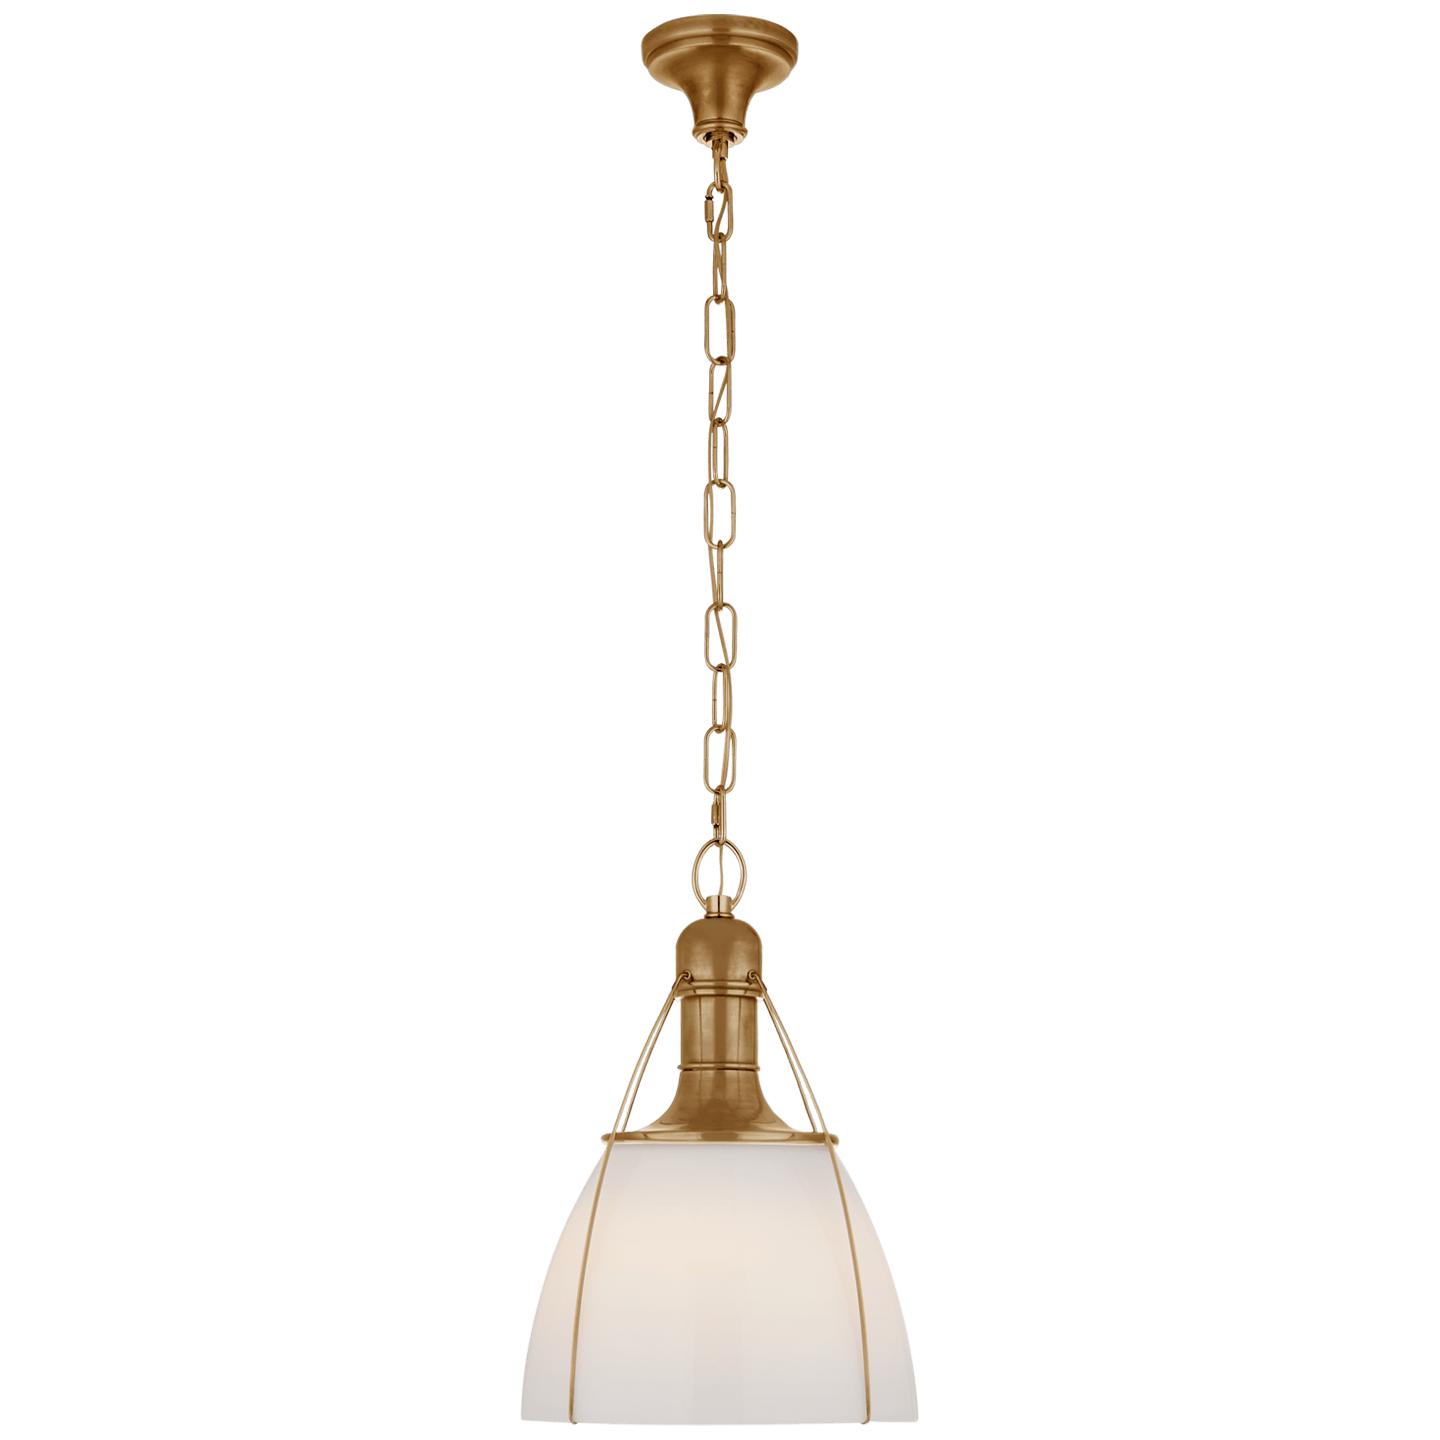 Antique-Burnished Brass White Glass